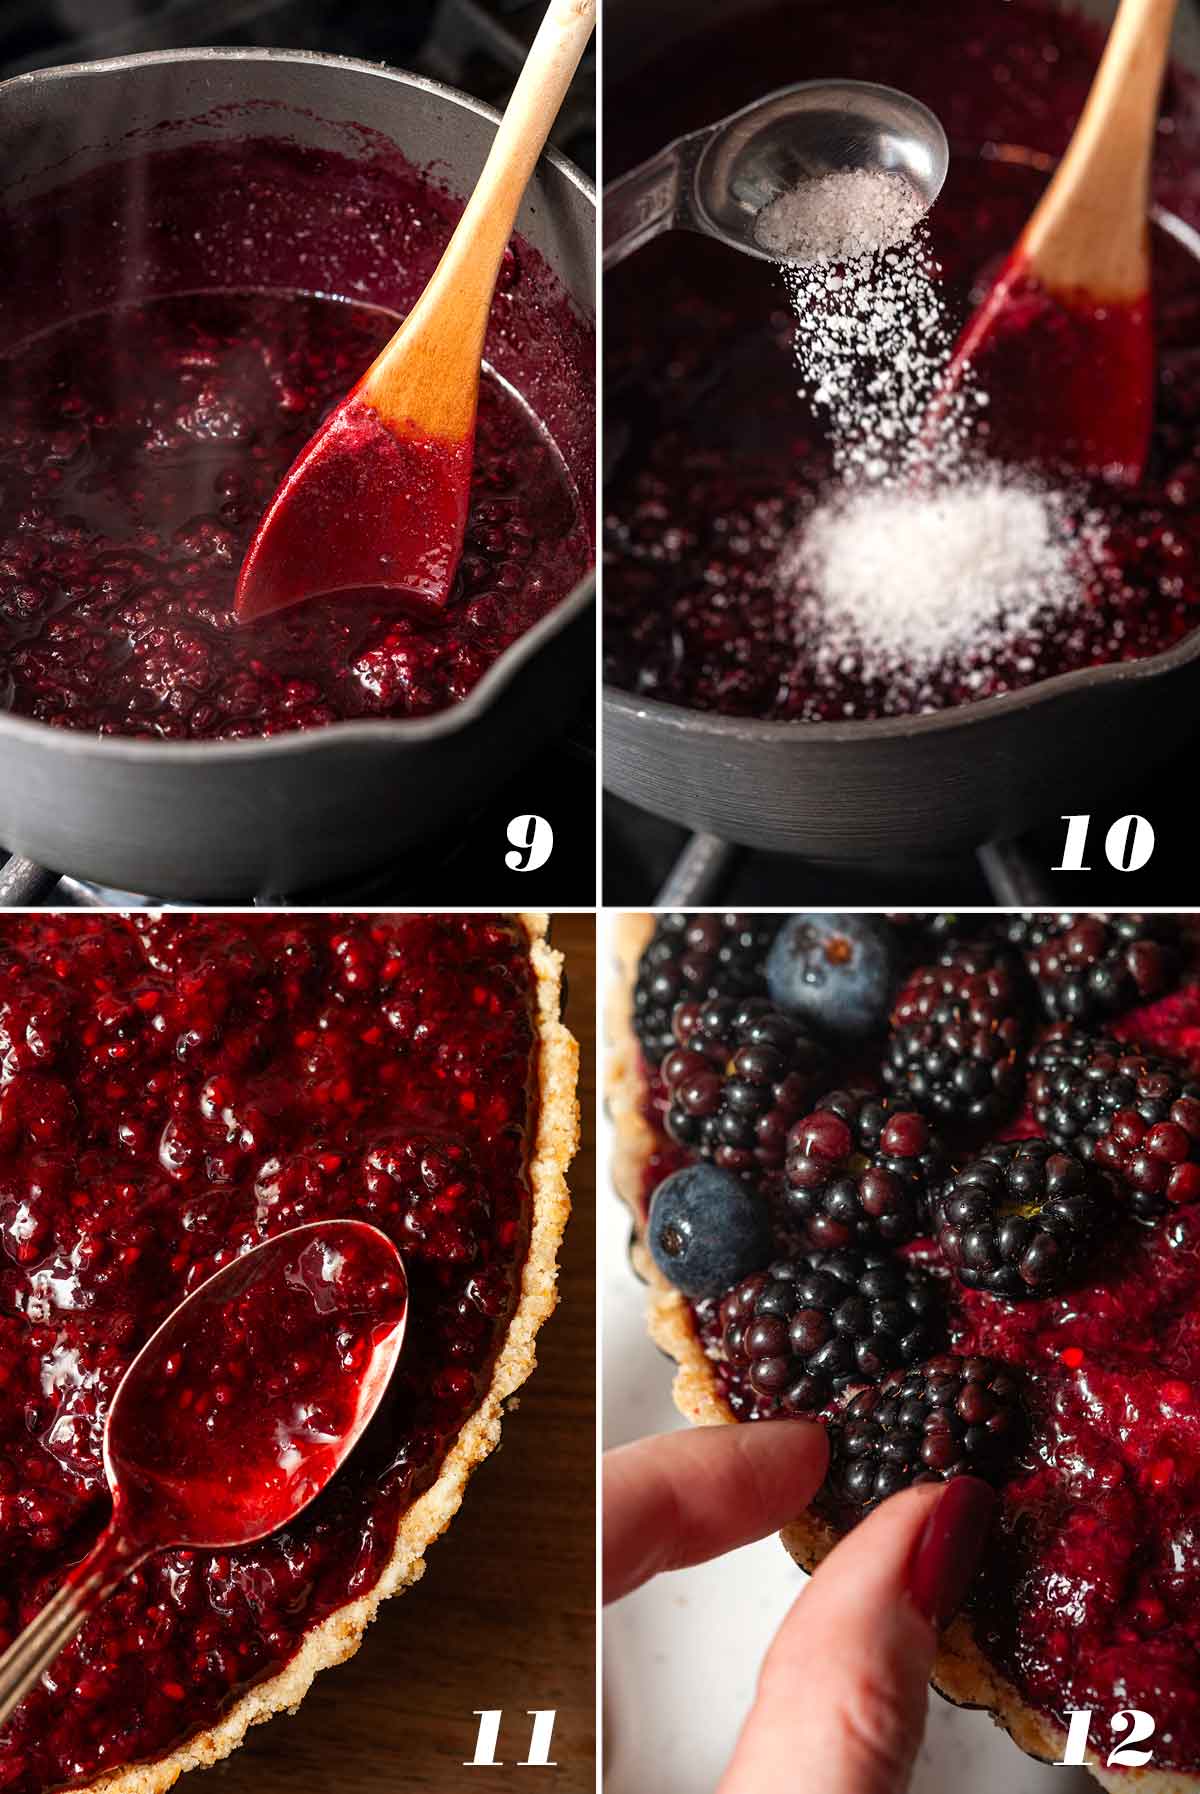 A collage of 4 numbered images showing how to make blackberry Sorel compote and adding to cheesecake.